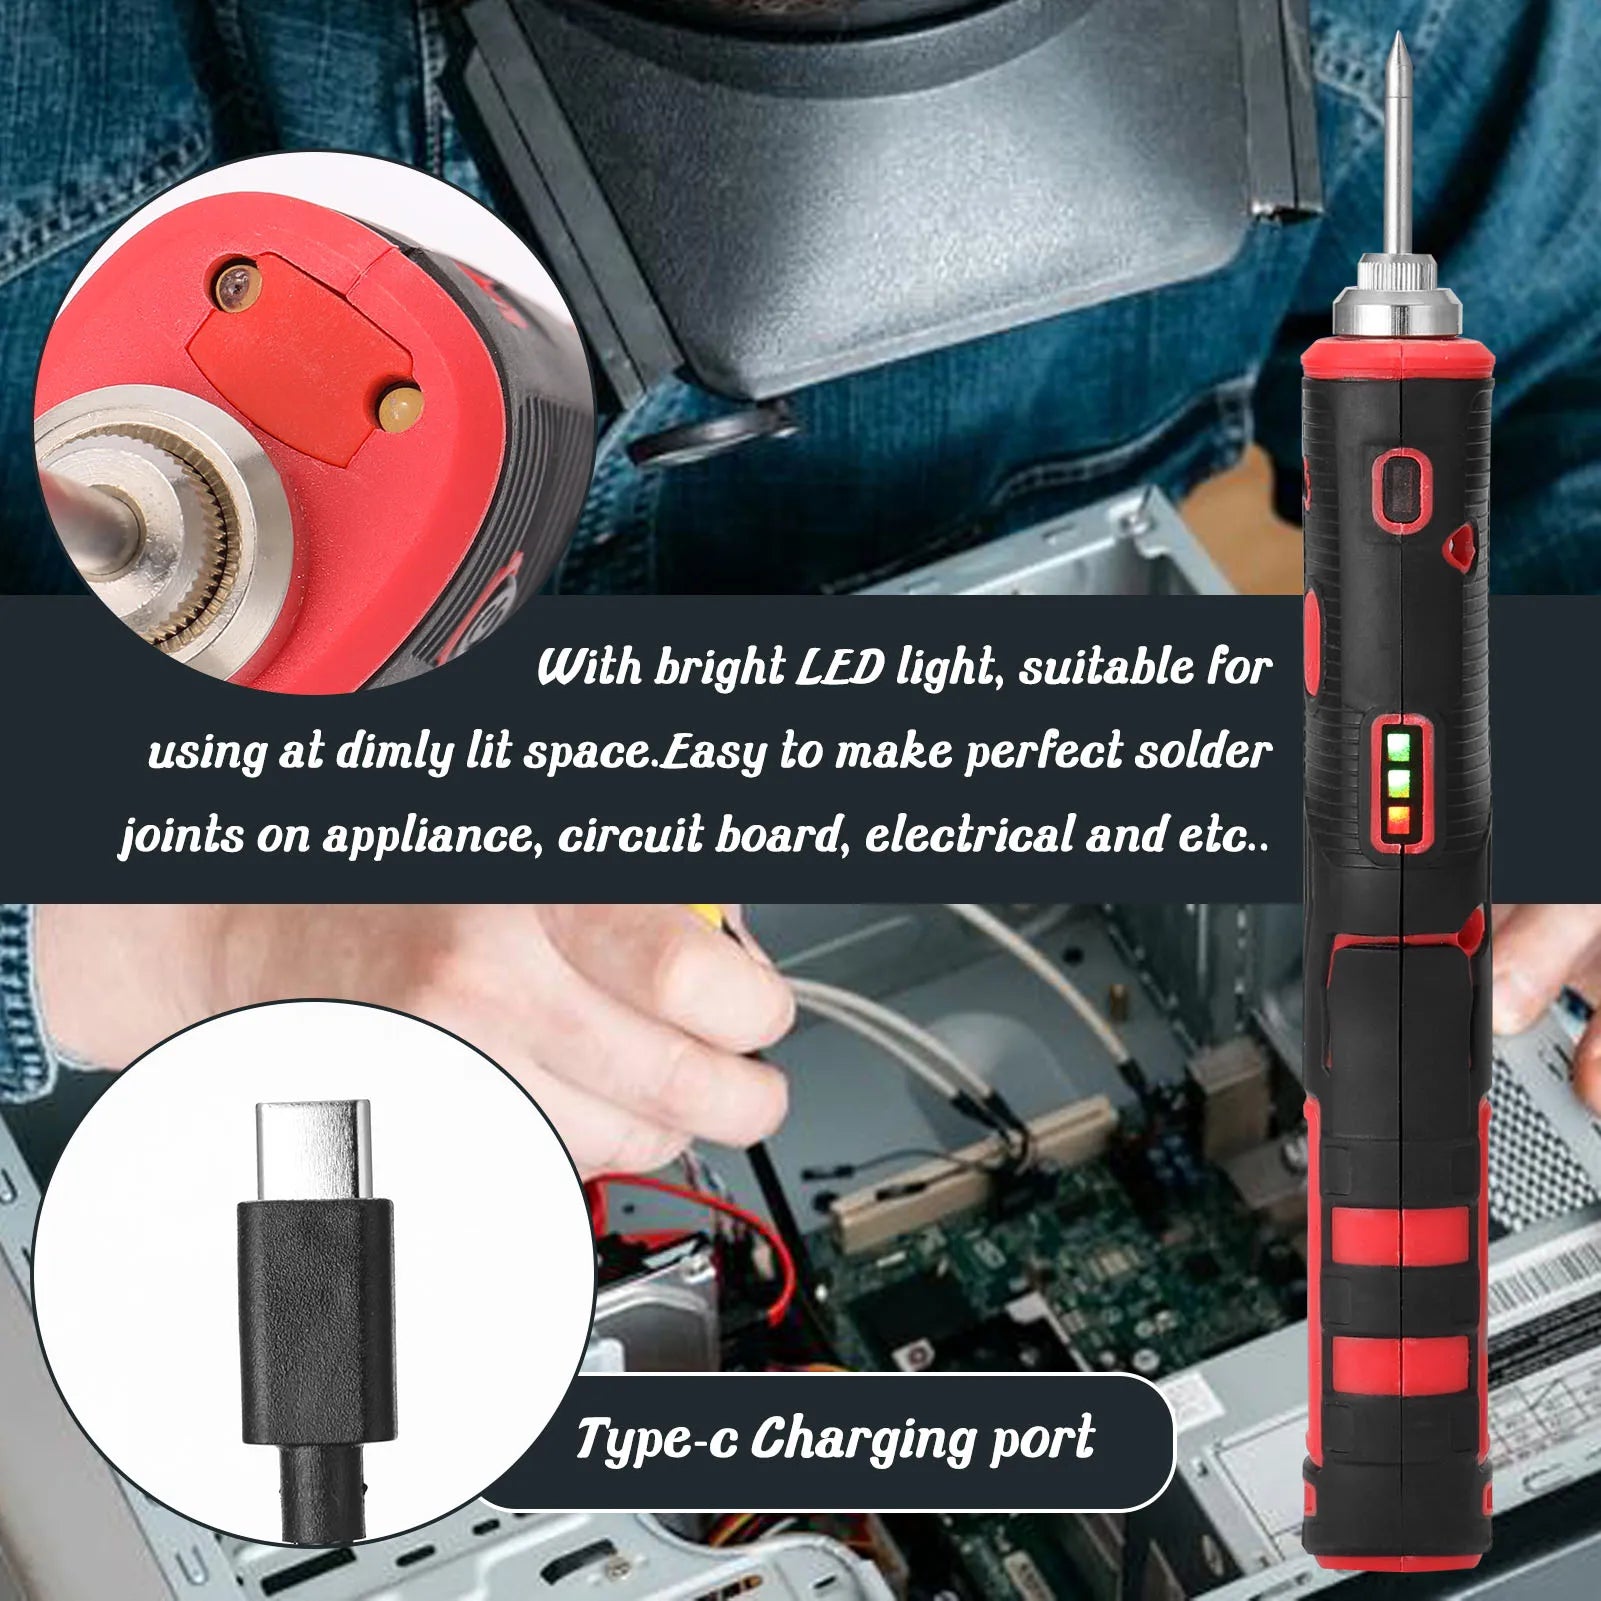 FrogBro 11W Battery soldering iron 2500mAh Rechargeable Soldering Tool Kit Professional Safe Electronic Welding Devices